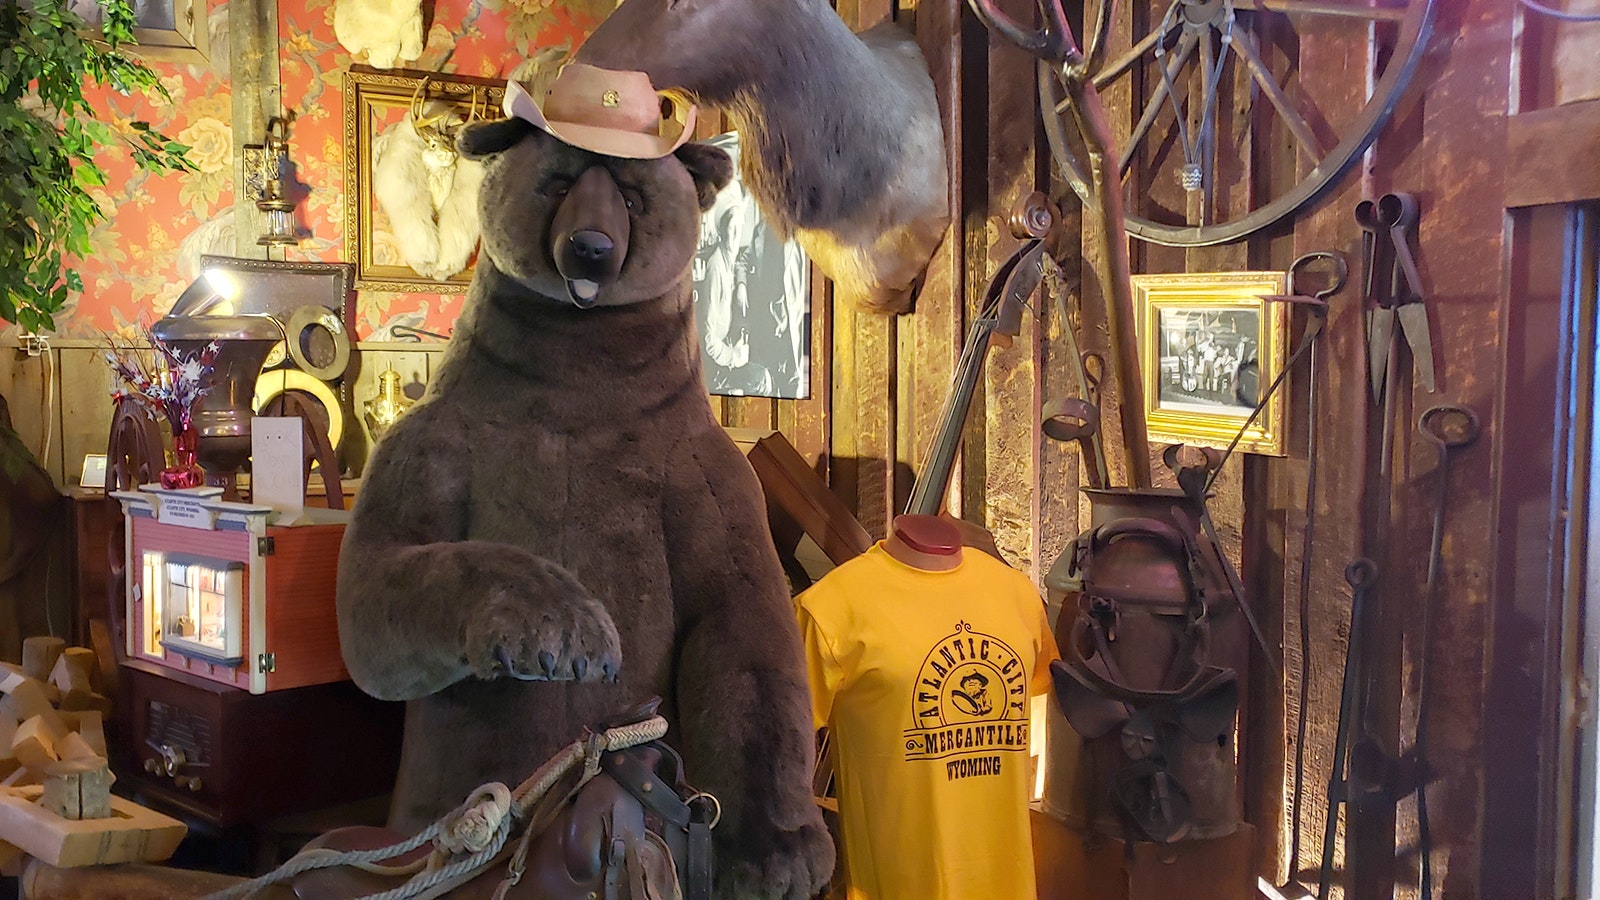 Smoky Bear hangs out at the Atlantic City Mercantile between public service messages.